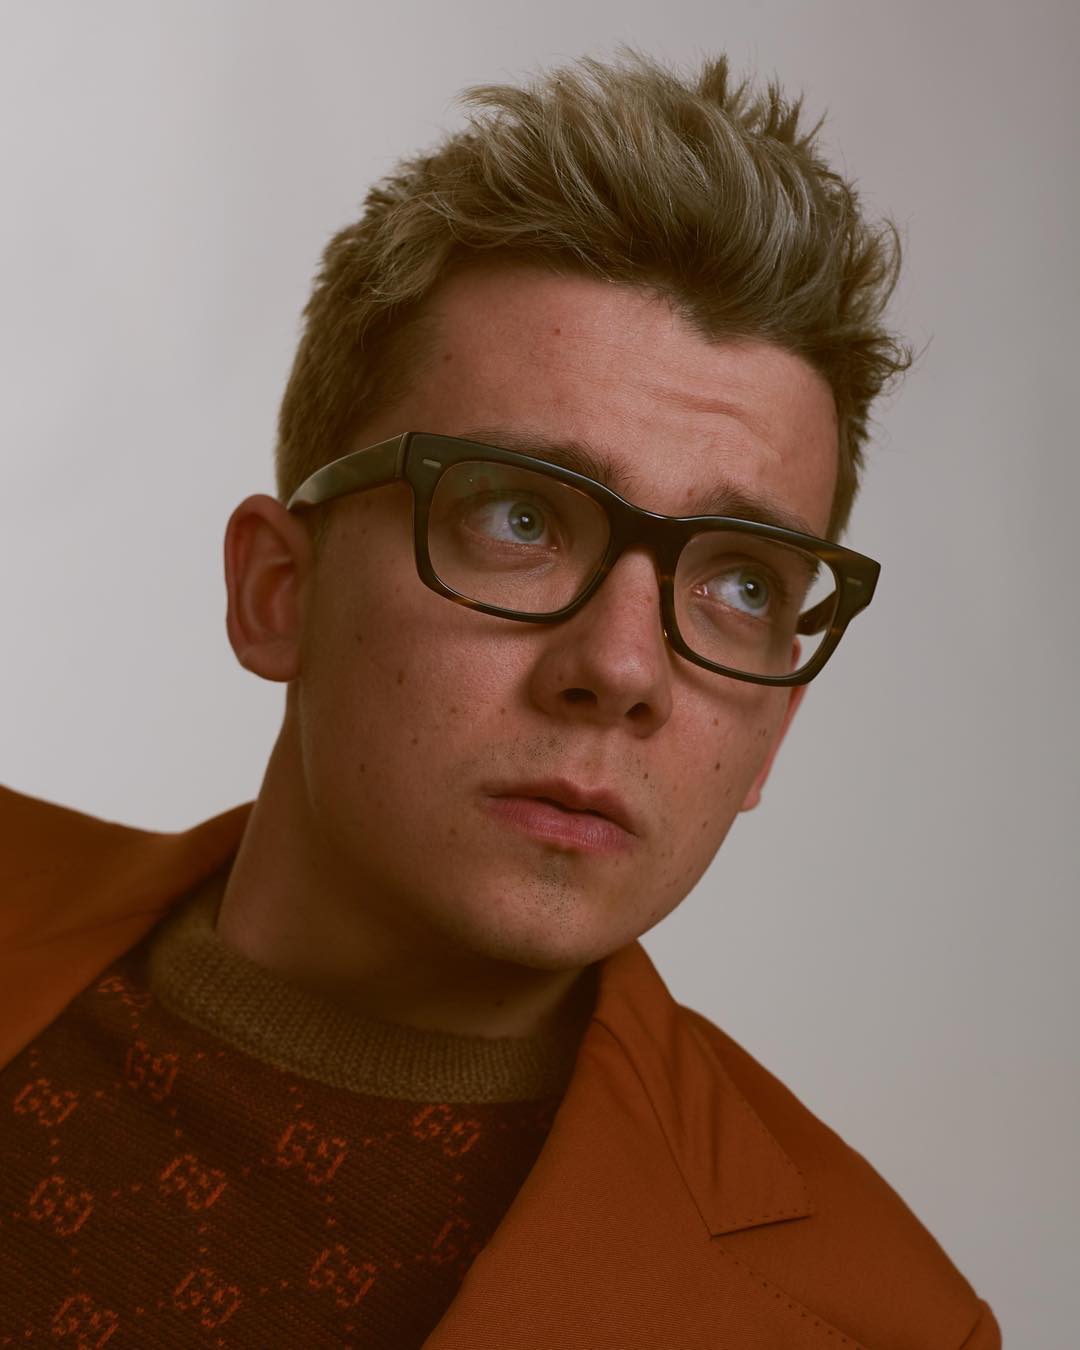 Asa Butterfield - Biography, Profile, Facts, and Career